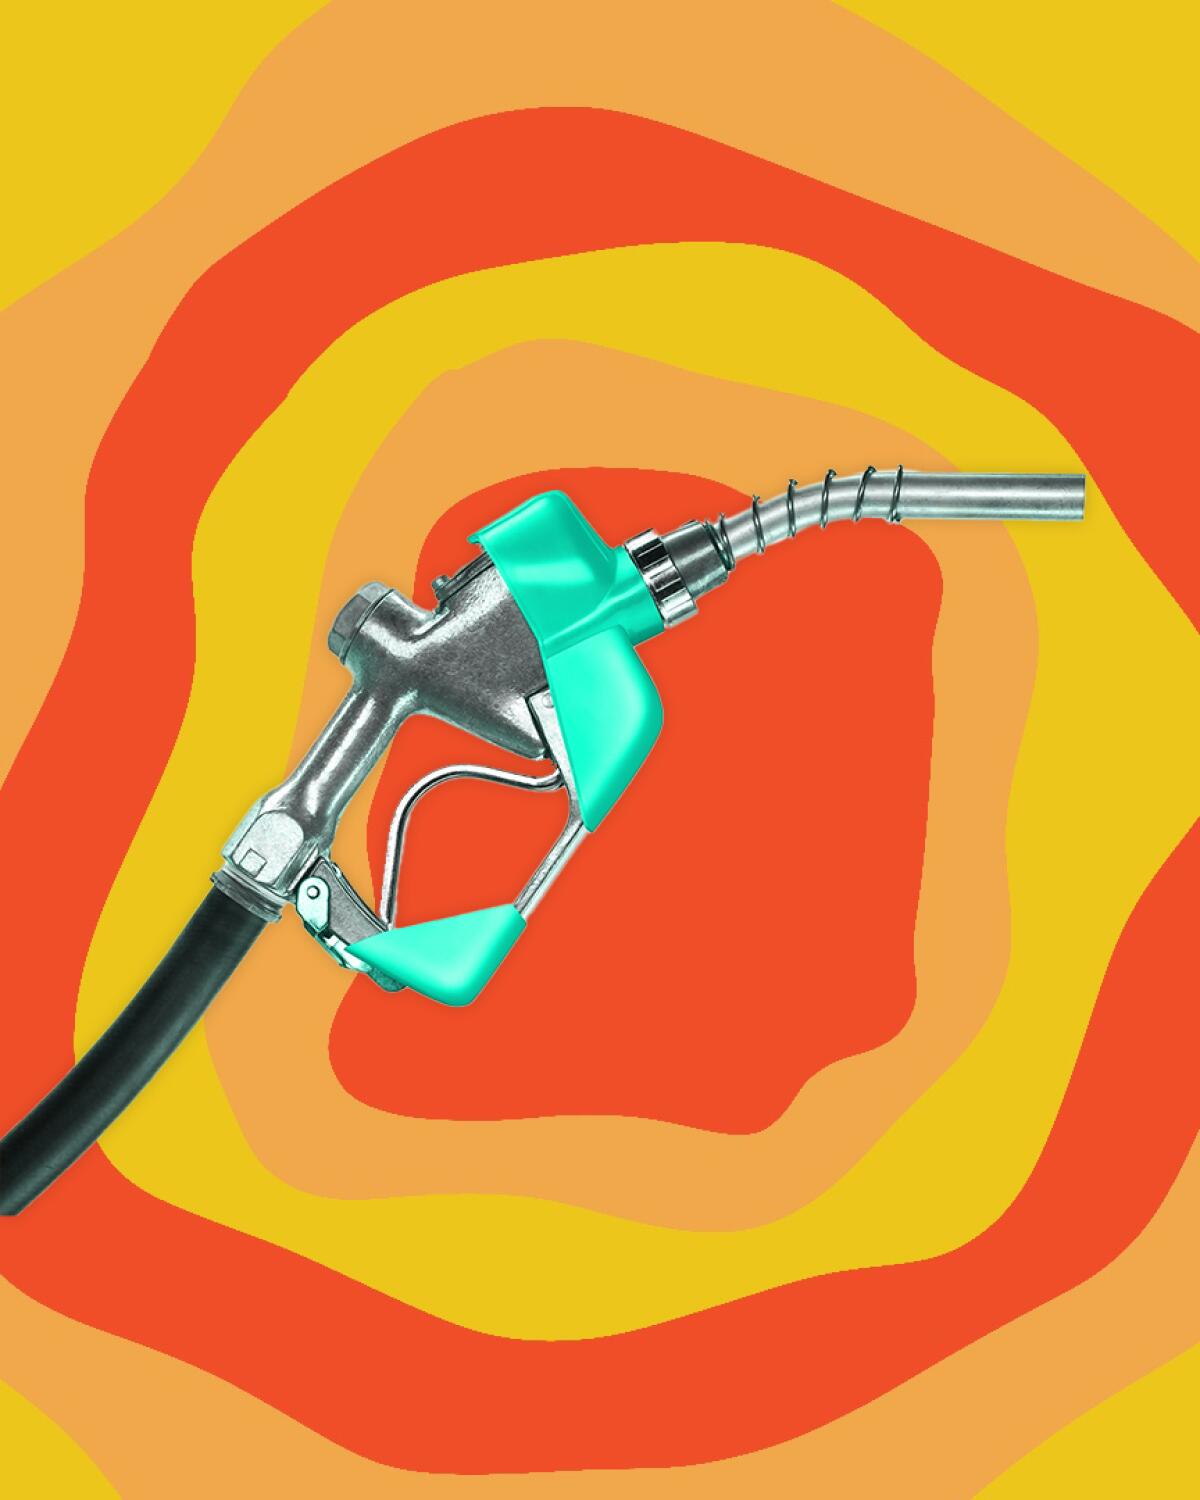 Photo of gas pump with vibrant background colors.